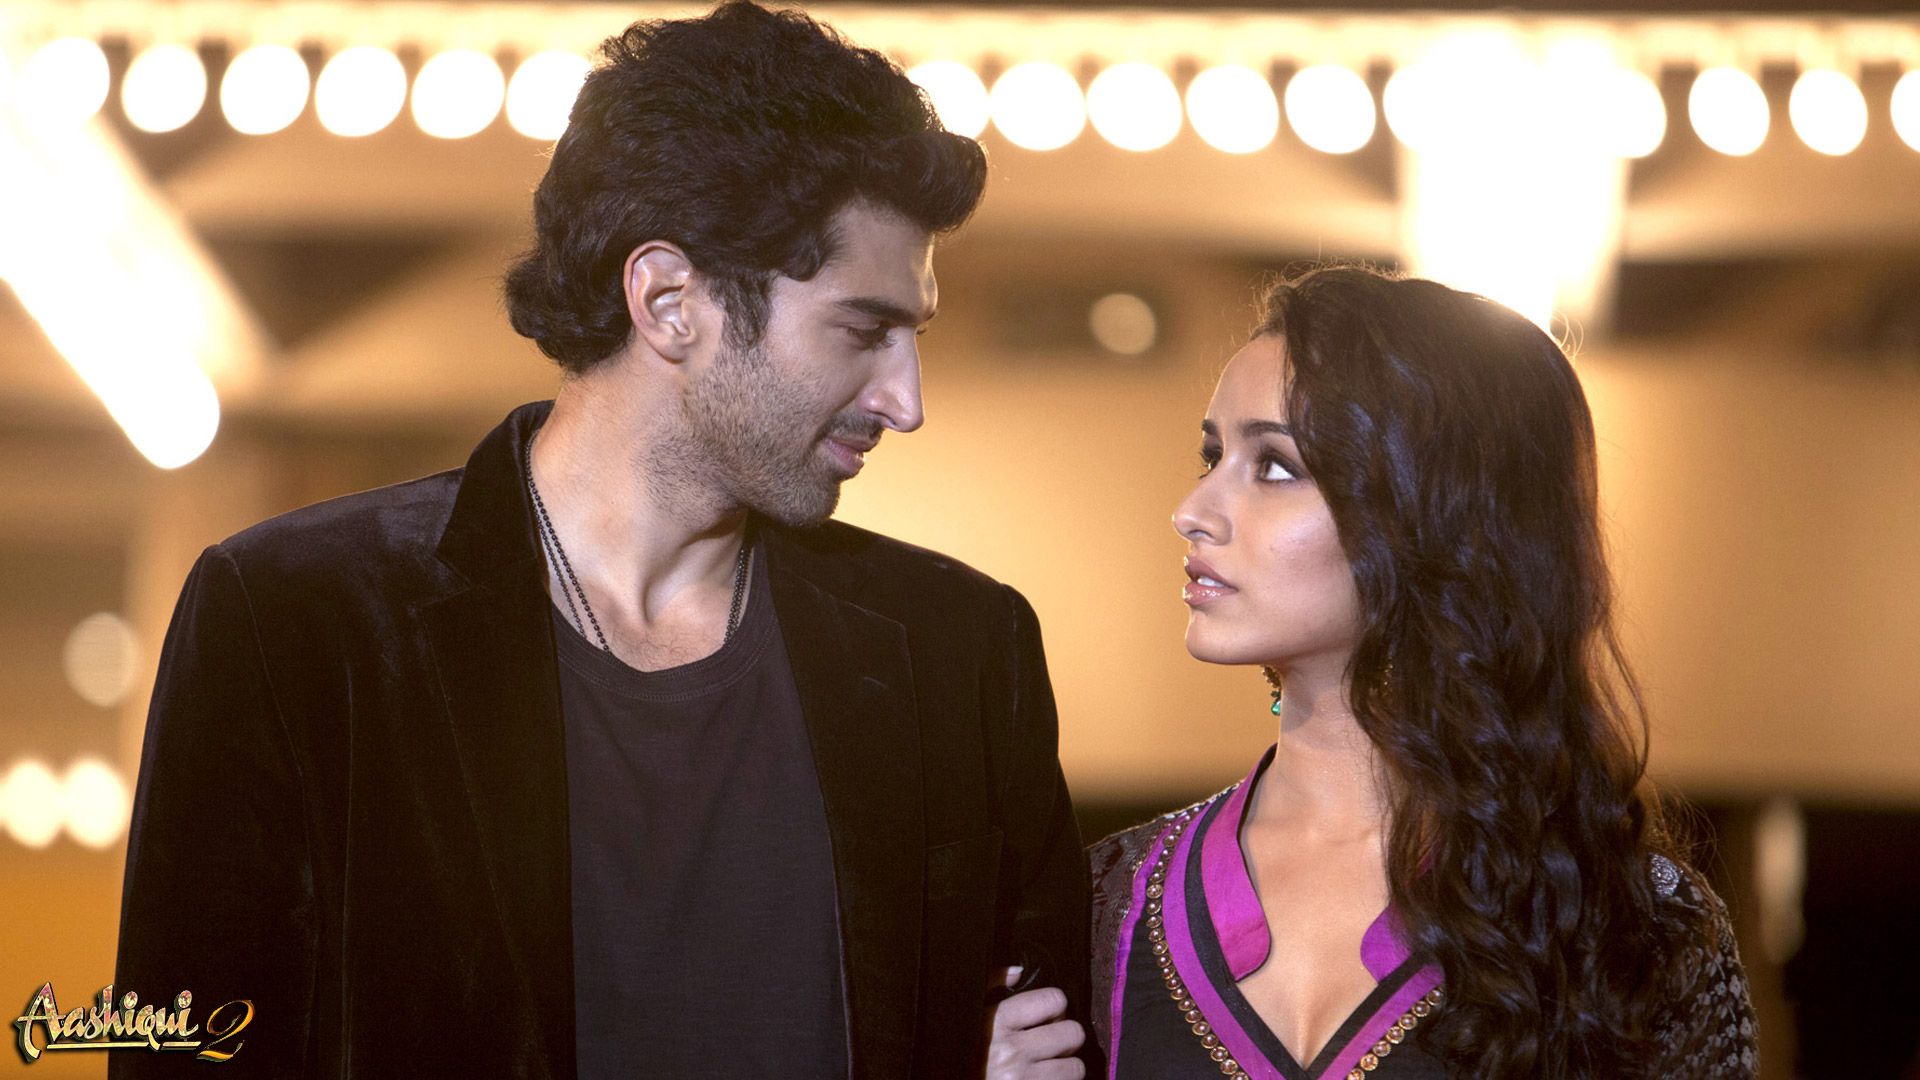 Love Scene From Aashiqui 2 HD Bollywood Movies Wallpapers for 1920x1080